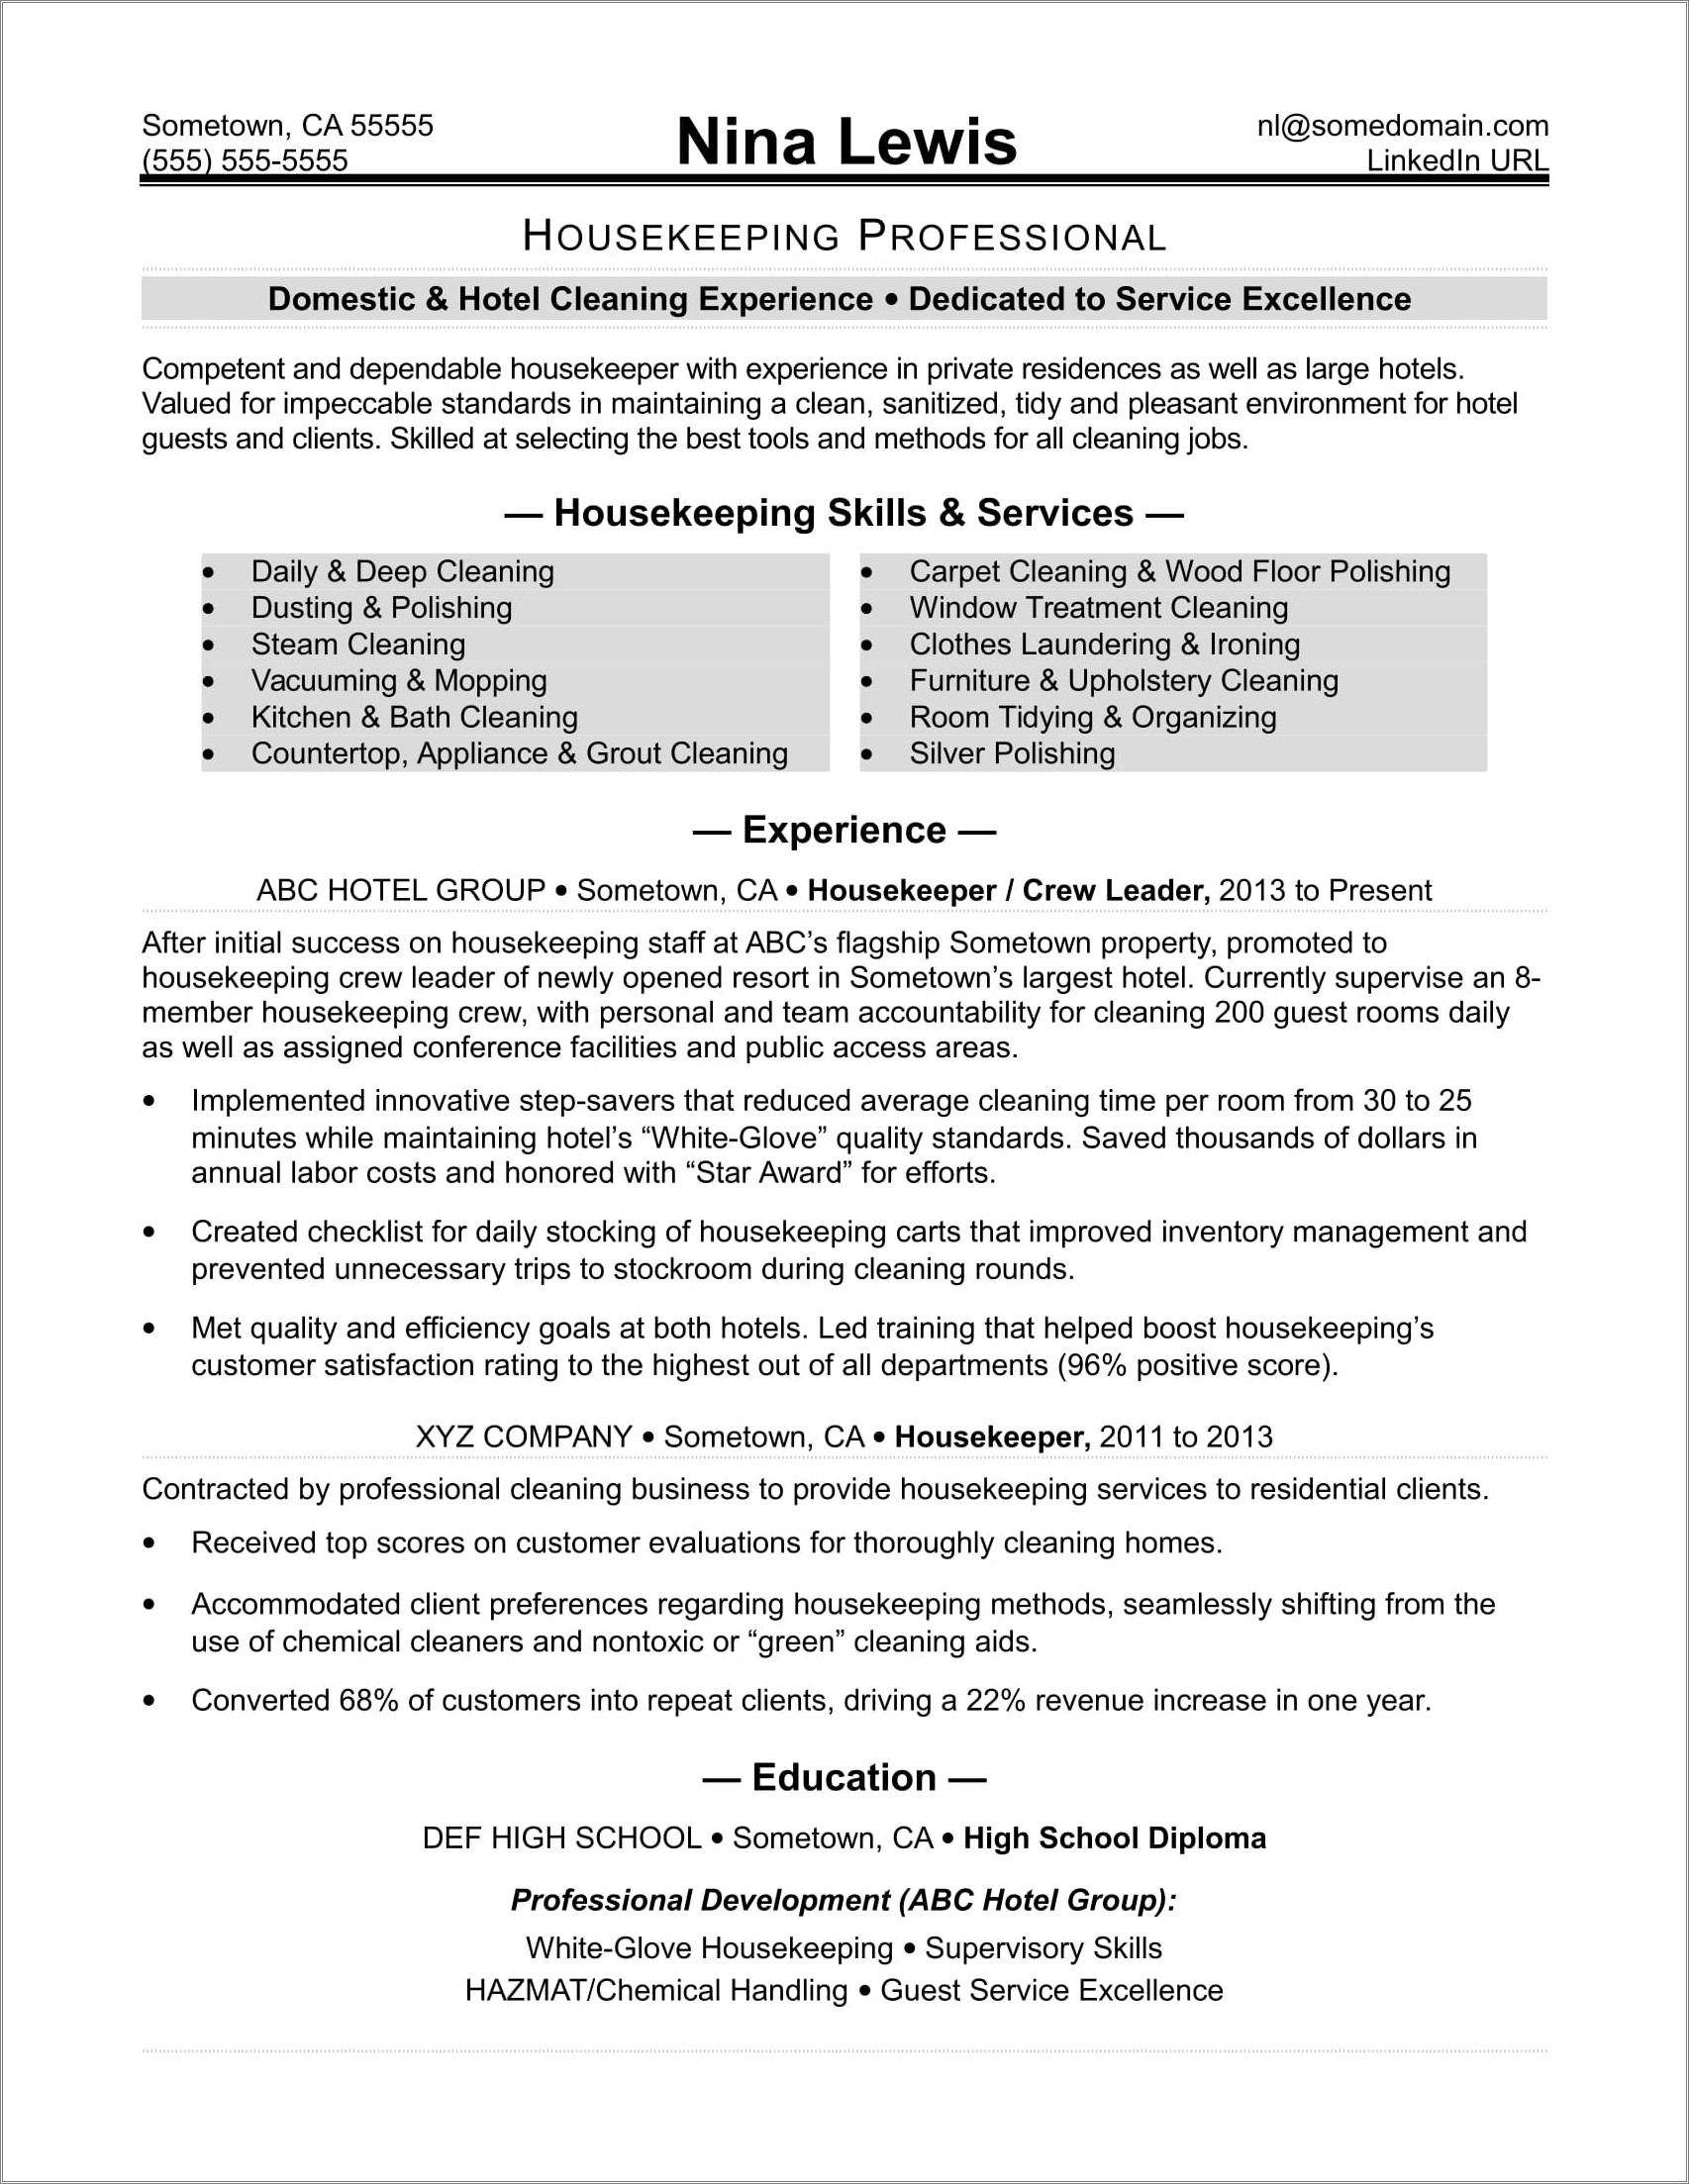 Resume Same Company Different Positions Examples